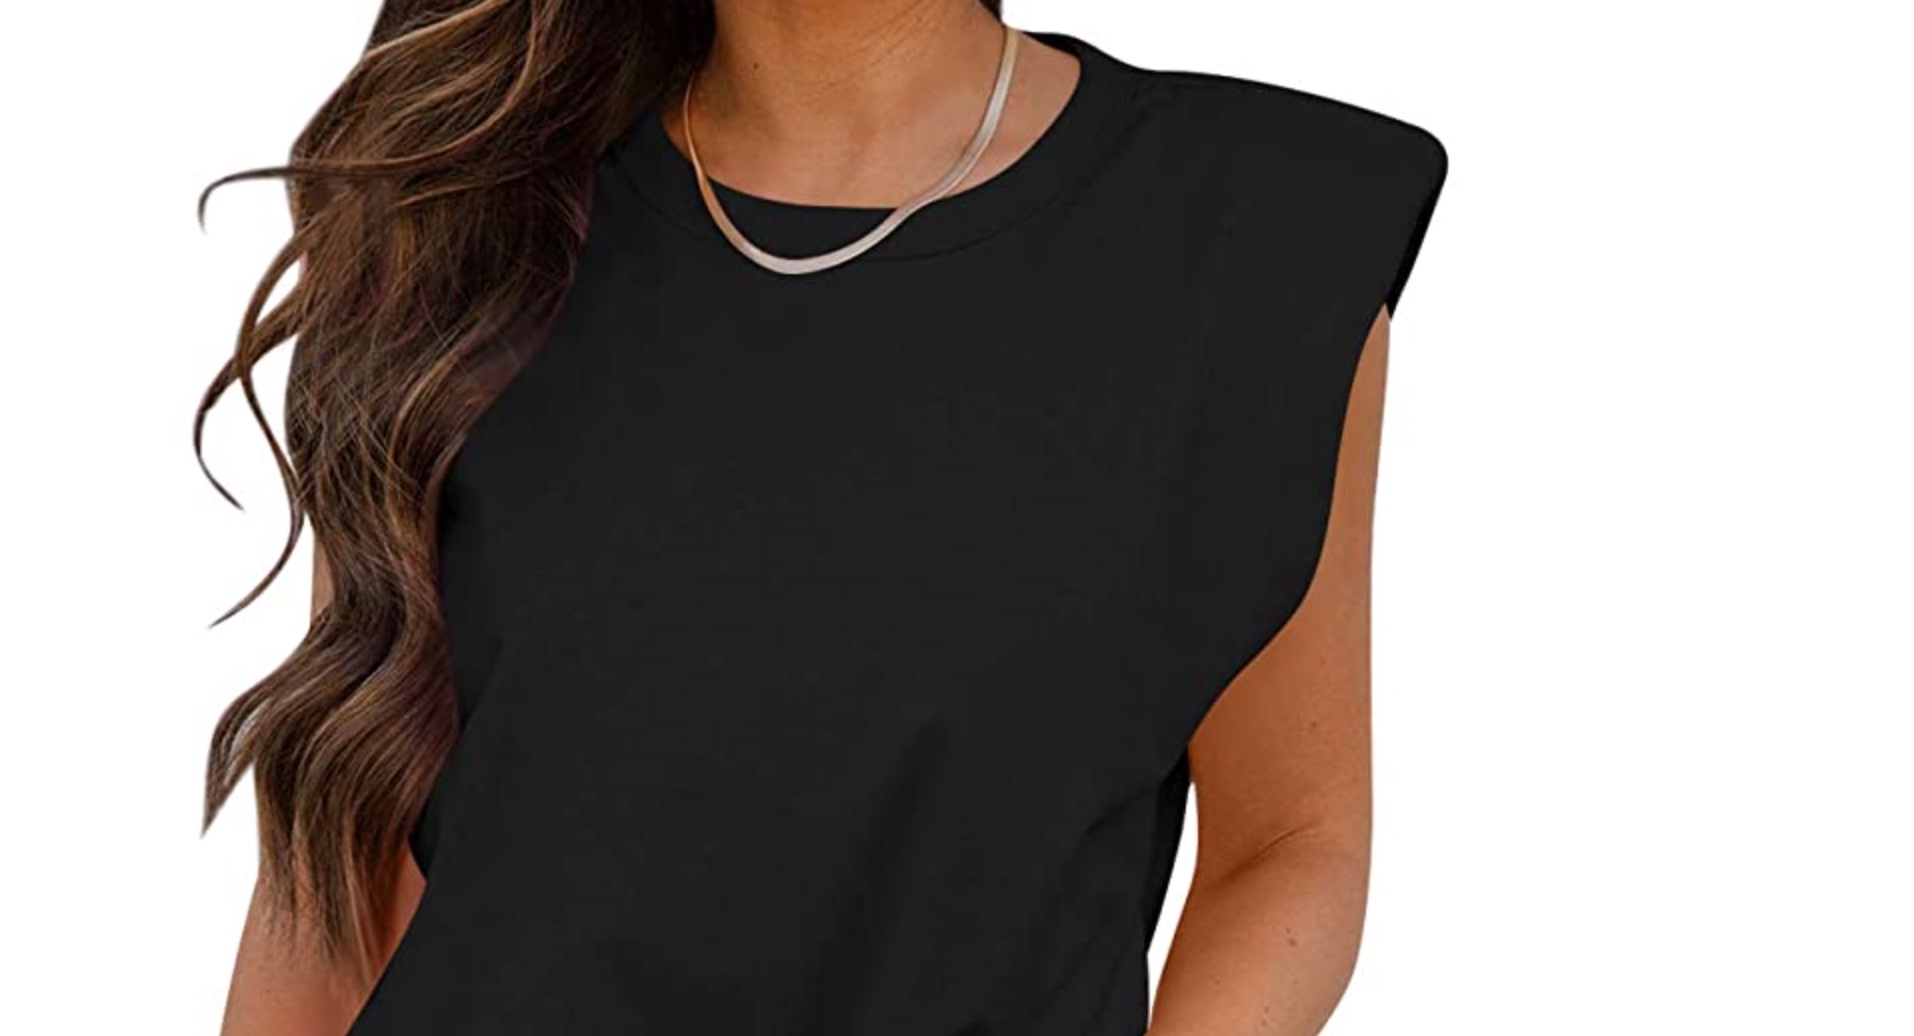 Shoulder Pads Are Making A Comeback, So Buy This Tank Top